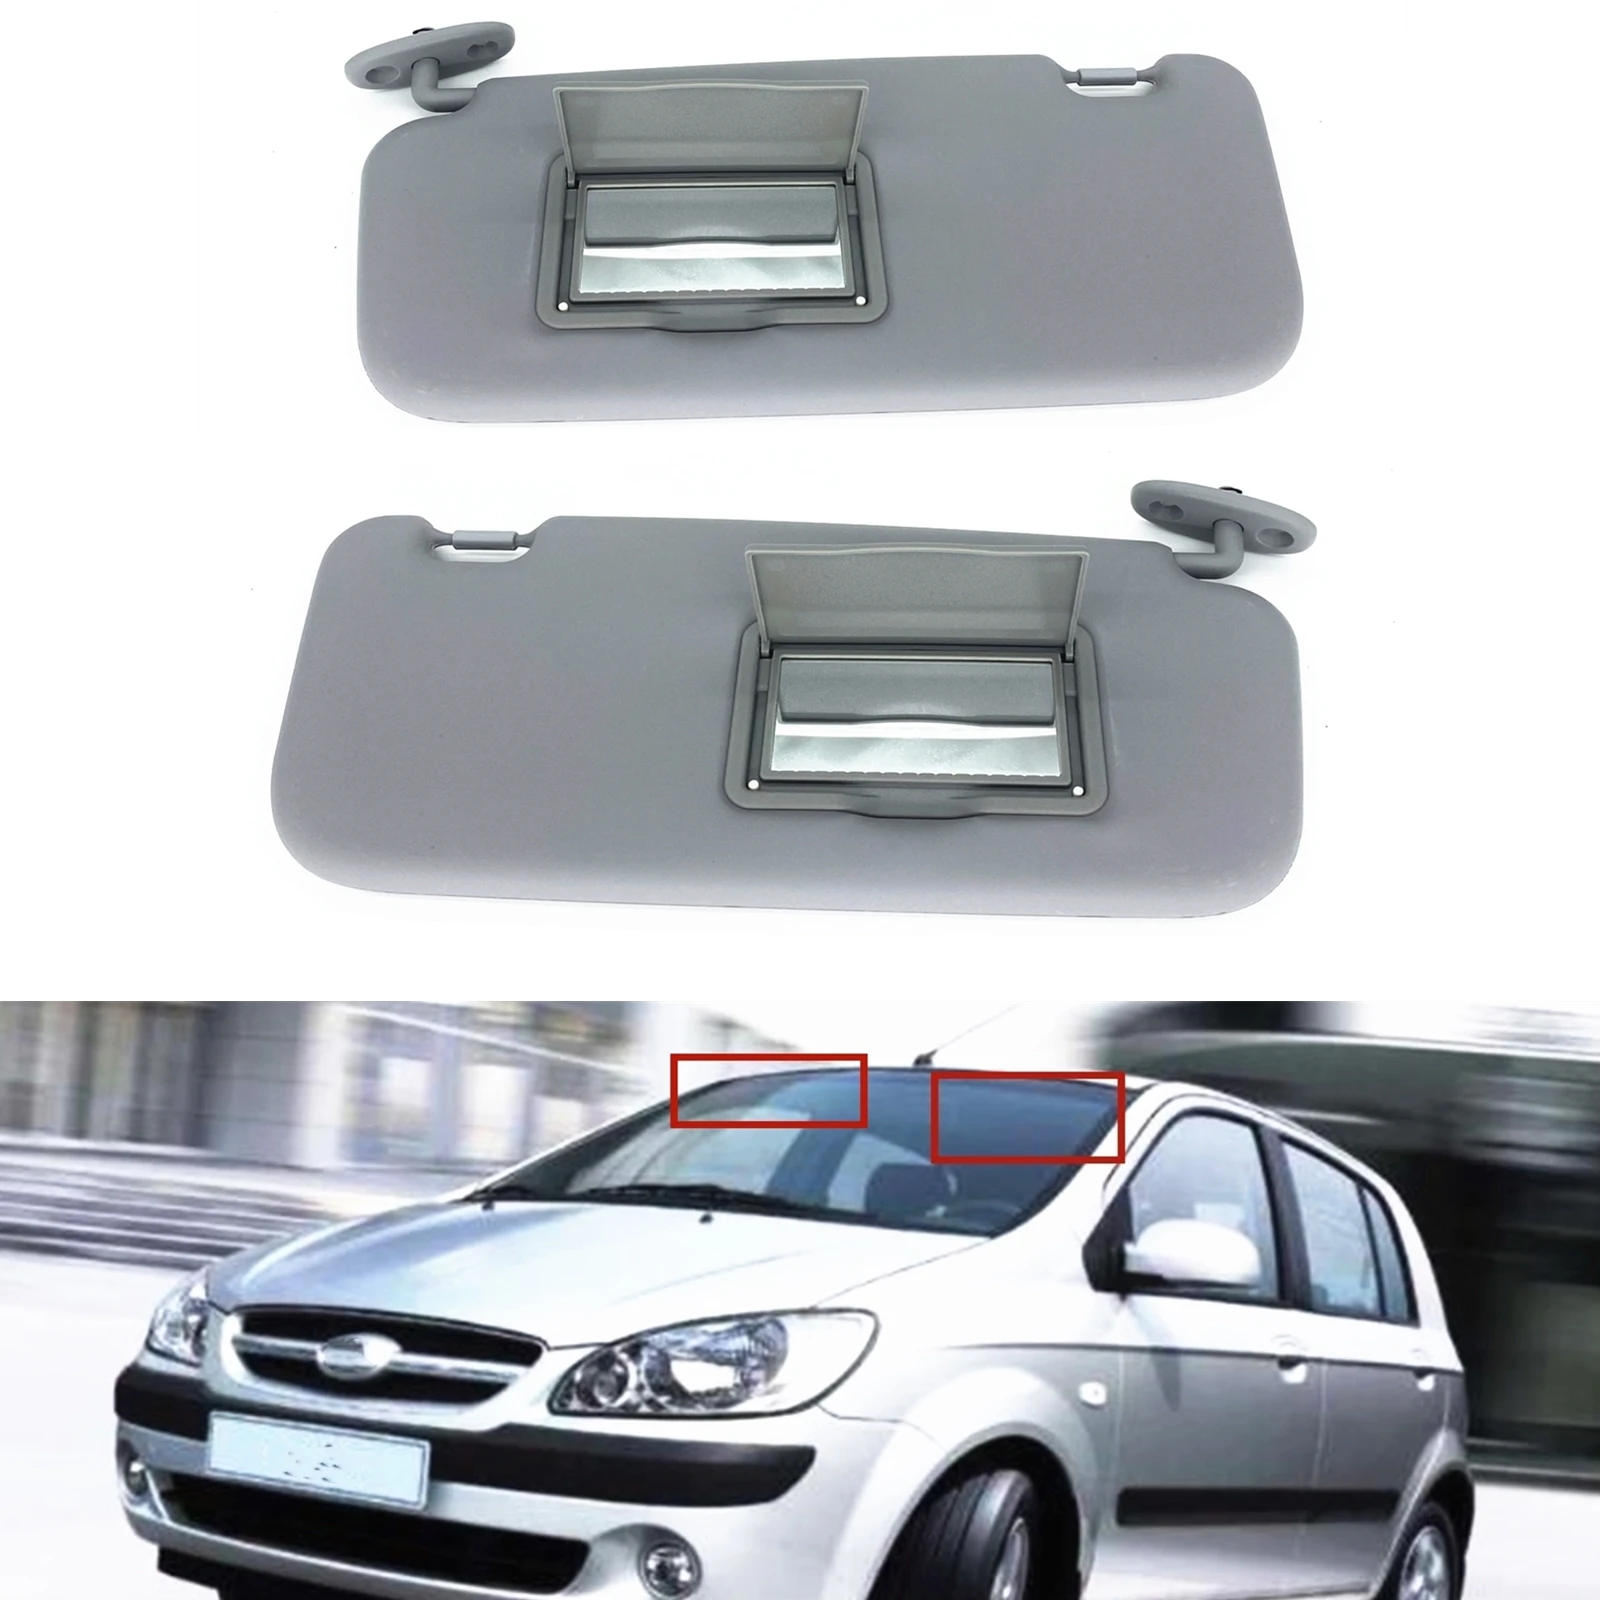 

Sunshade Gray Sun Visor For HYUNDAI GETZ CLICK 2002-2012 LHD Car Left/Right Front Sunvisor Blind Cover Shield Shade With Mirror